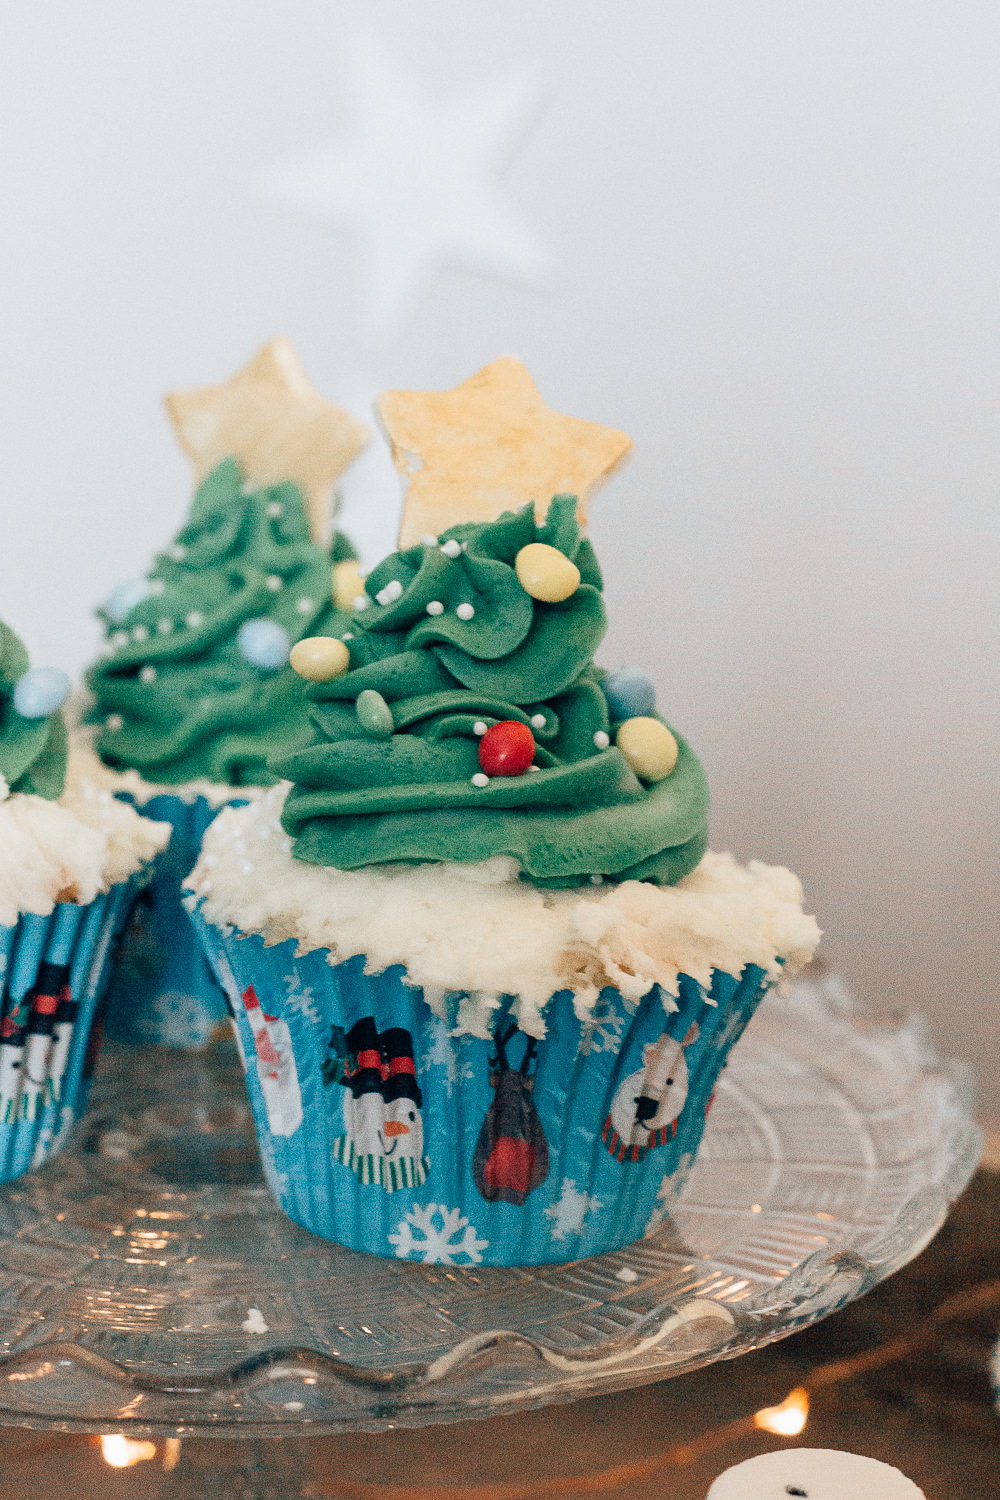 Christmas tree swirl cupcakes with chocolate baubles and fondant star topper